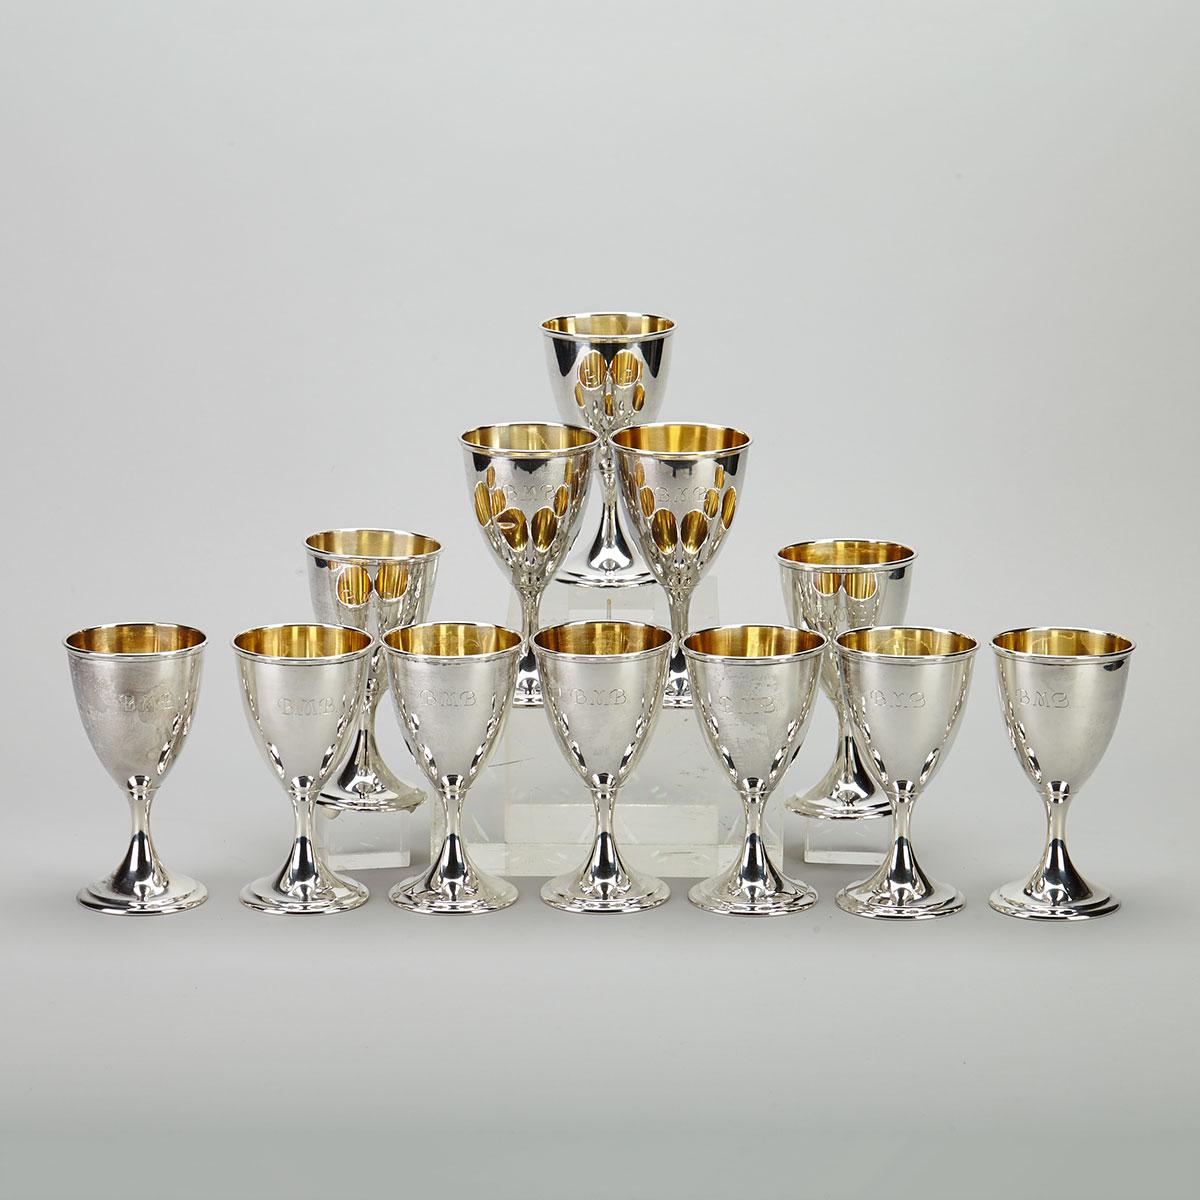 Twelve American Silver Goblets, R. Wallace & Sons, Wallingford, Ct., 20th century